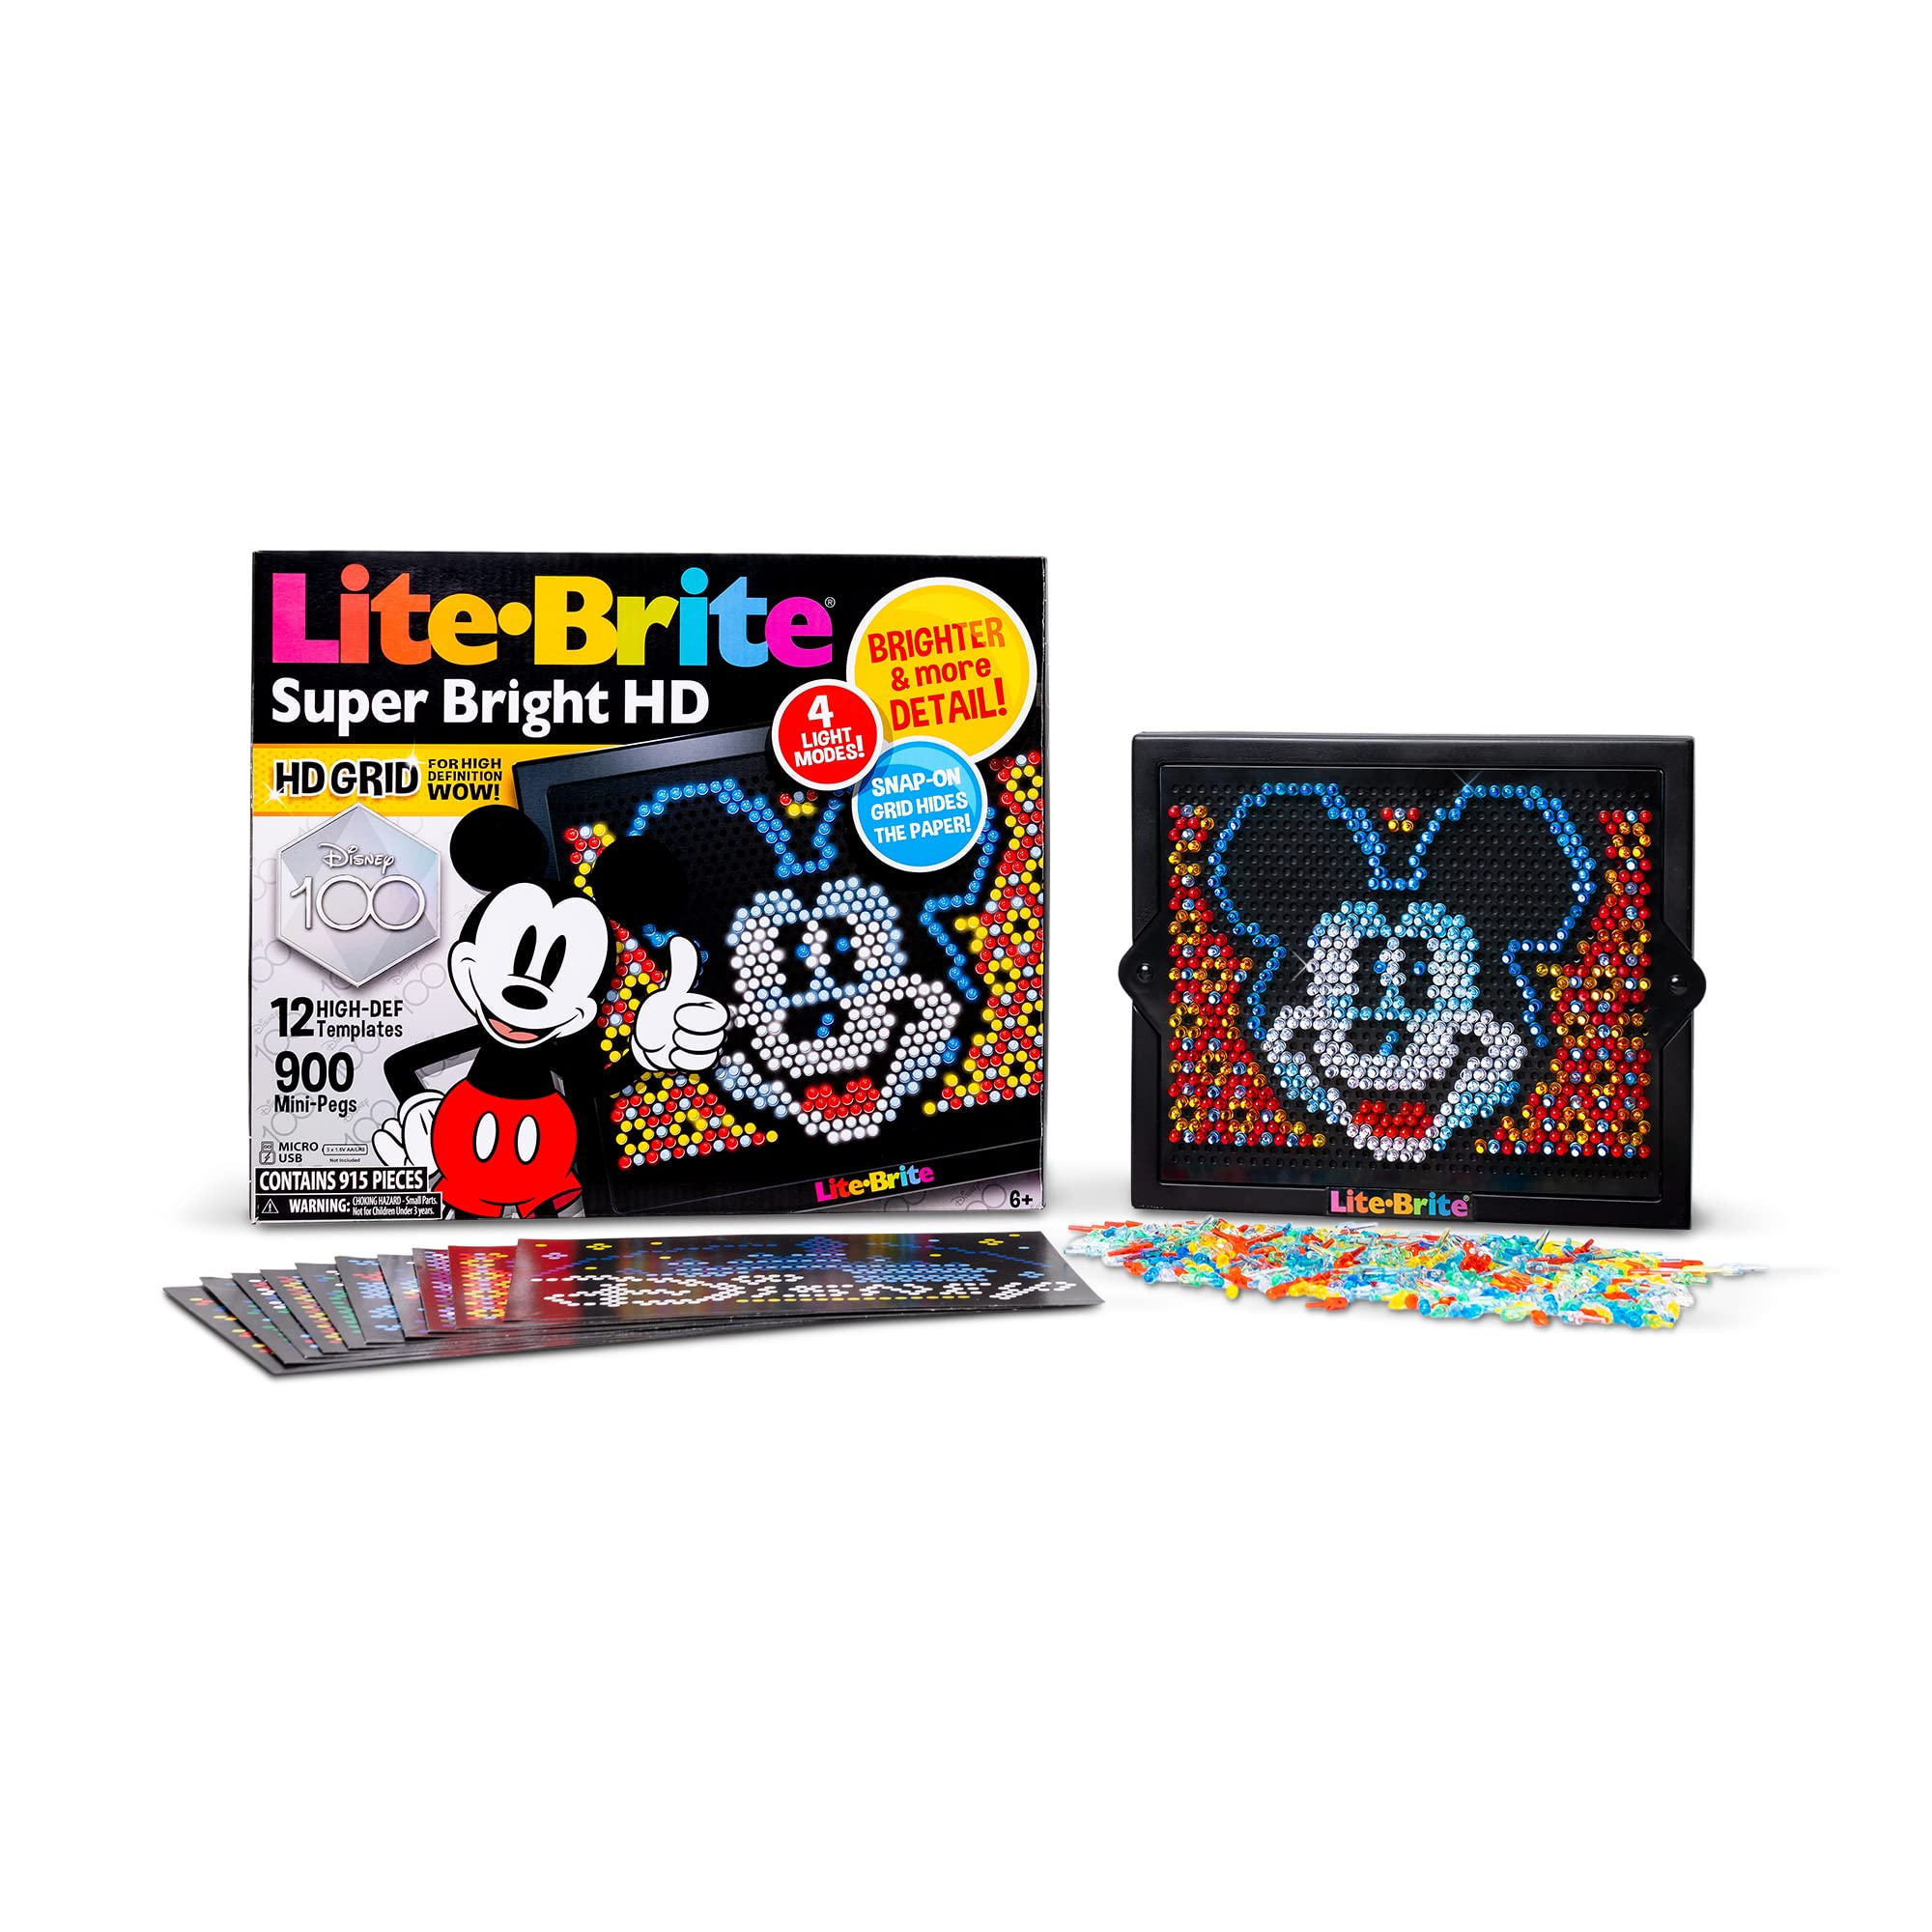 Lite Brite Disney Super Bright High Definition,100 Years of Wonder, Special Edition, Educational Learning Toy, Great Holiday, Christmas, Birthday Gift for Girls and Boys Ages 6,7,8,9,10+